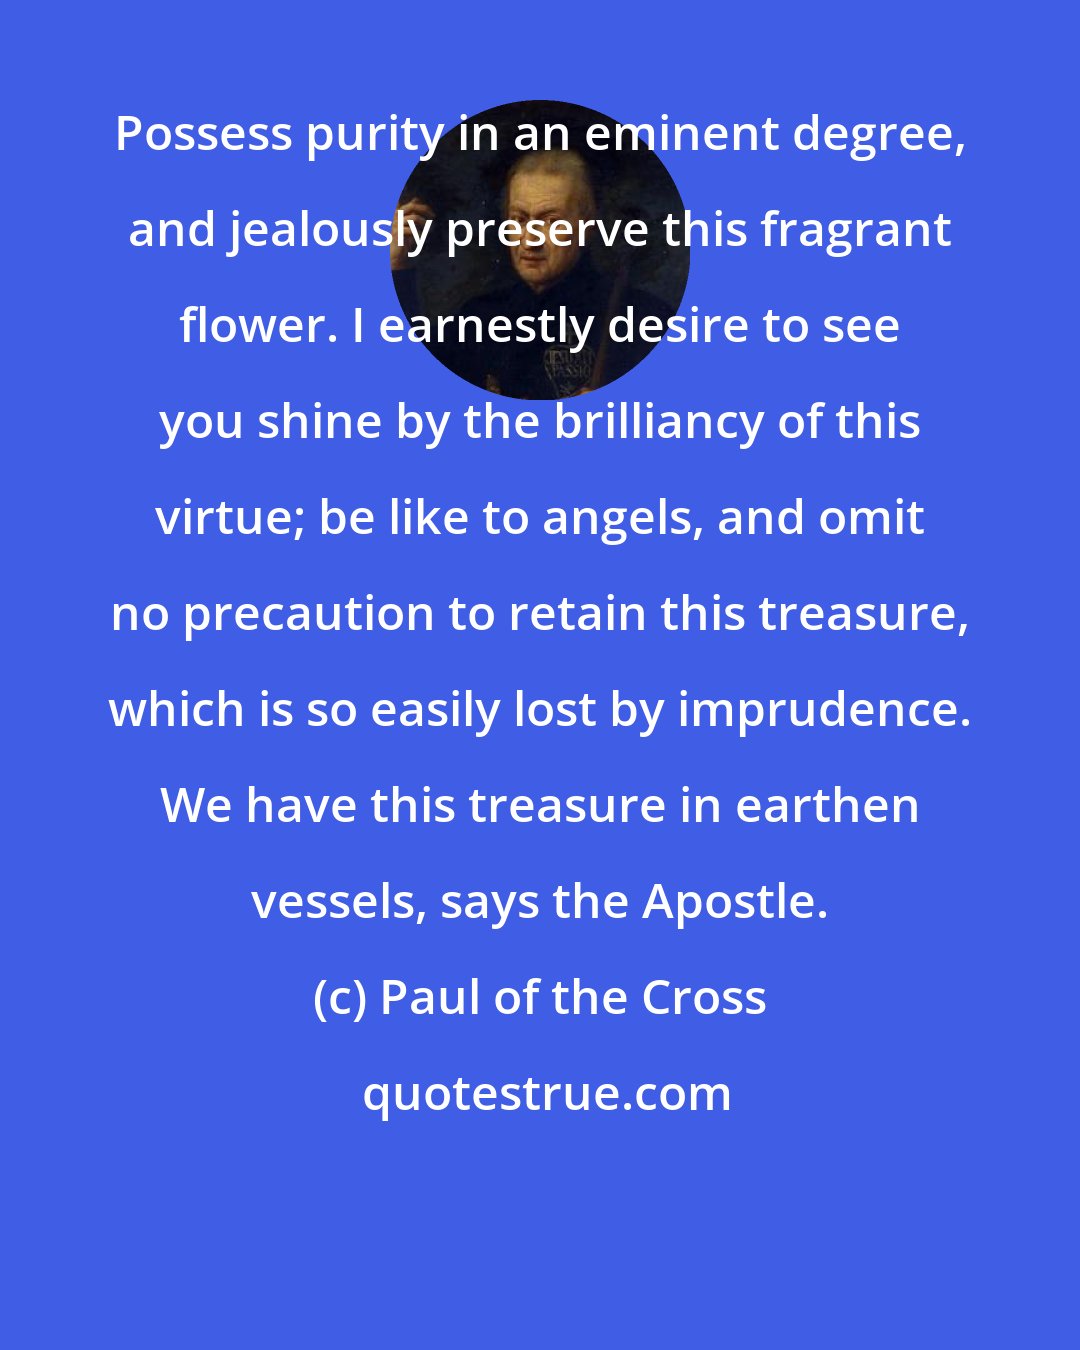 Paul of the Cross: Possess purity in an eminent degree, and jealously preserve this fragrant flower. I earnestly desire to see you shine by the brilliancy of this virtue; be like to angels, and omit no precaution to retain this treasure, which is so easily lost by imprudence. We have this treasure in earthen vessels, says the Apostle.